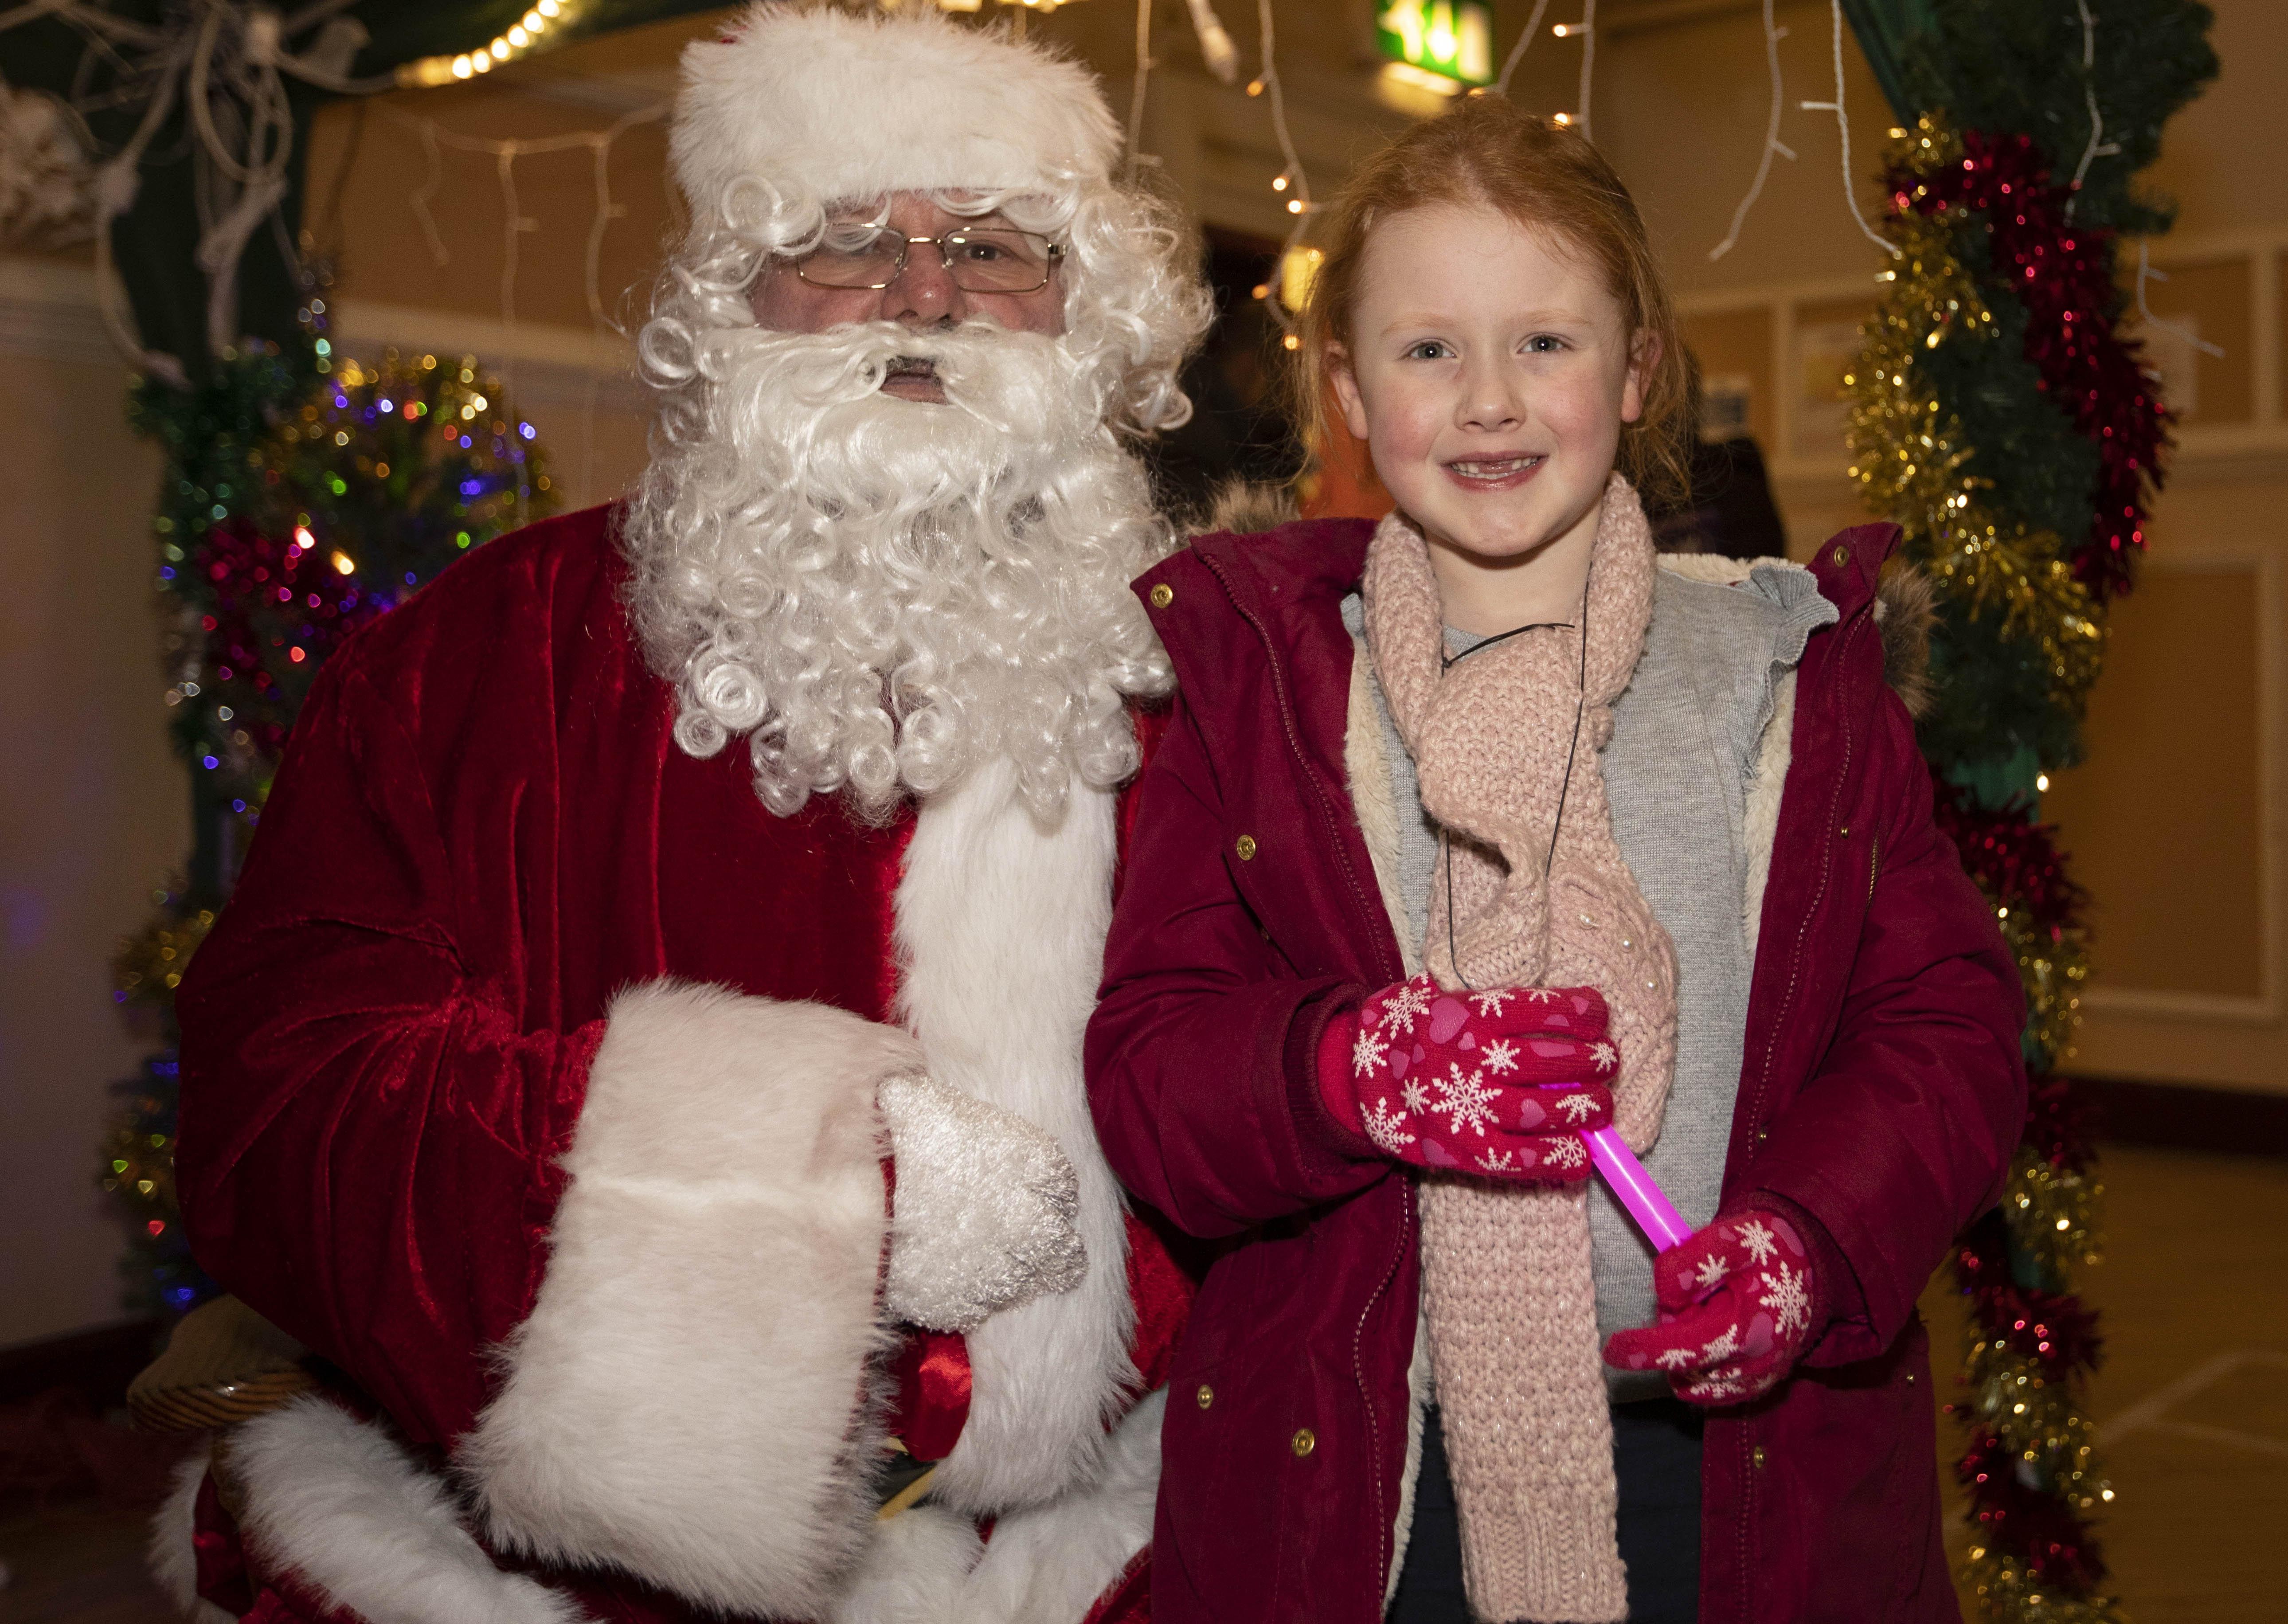 Grace McGrath is delighted to meet Santa in Melrose.